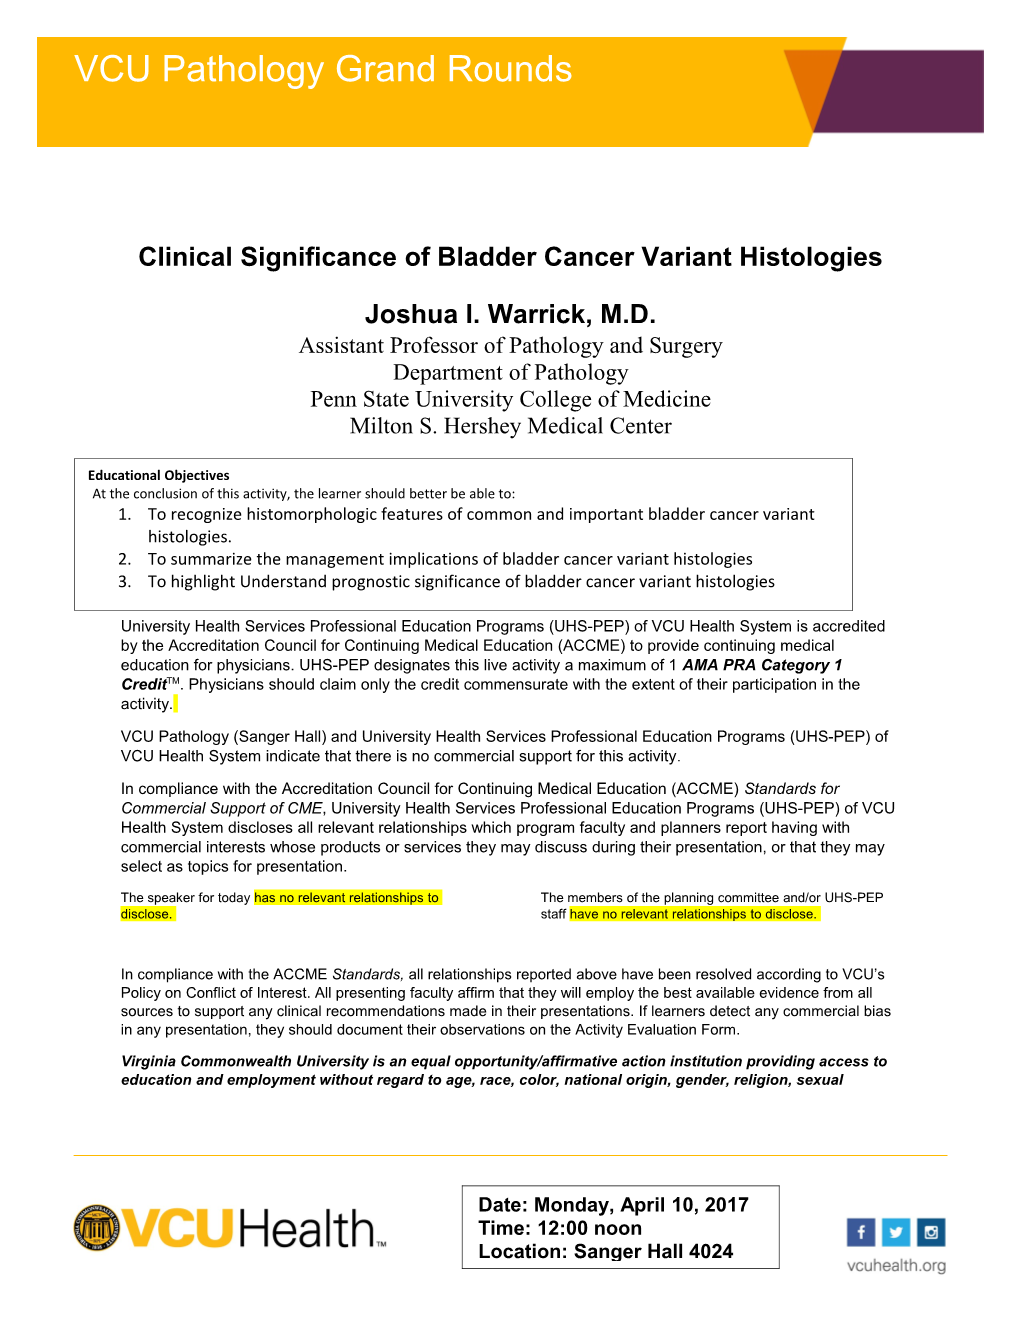 Clinical Significance of Bladder Cancer Variant Histologies